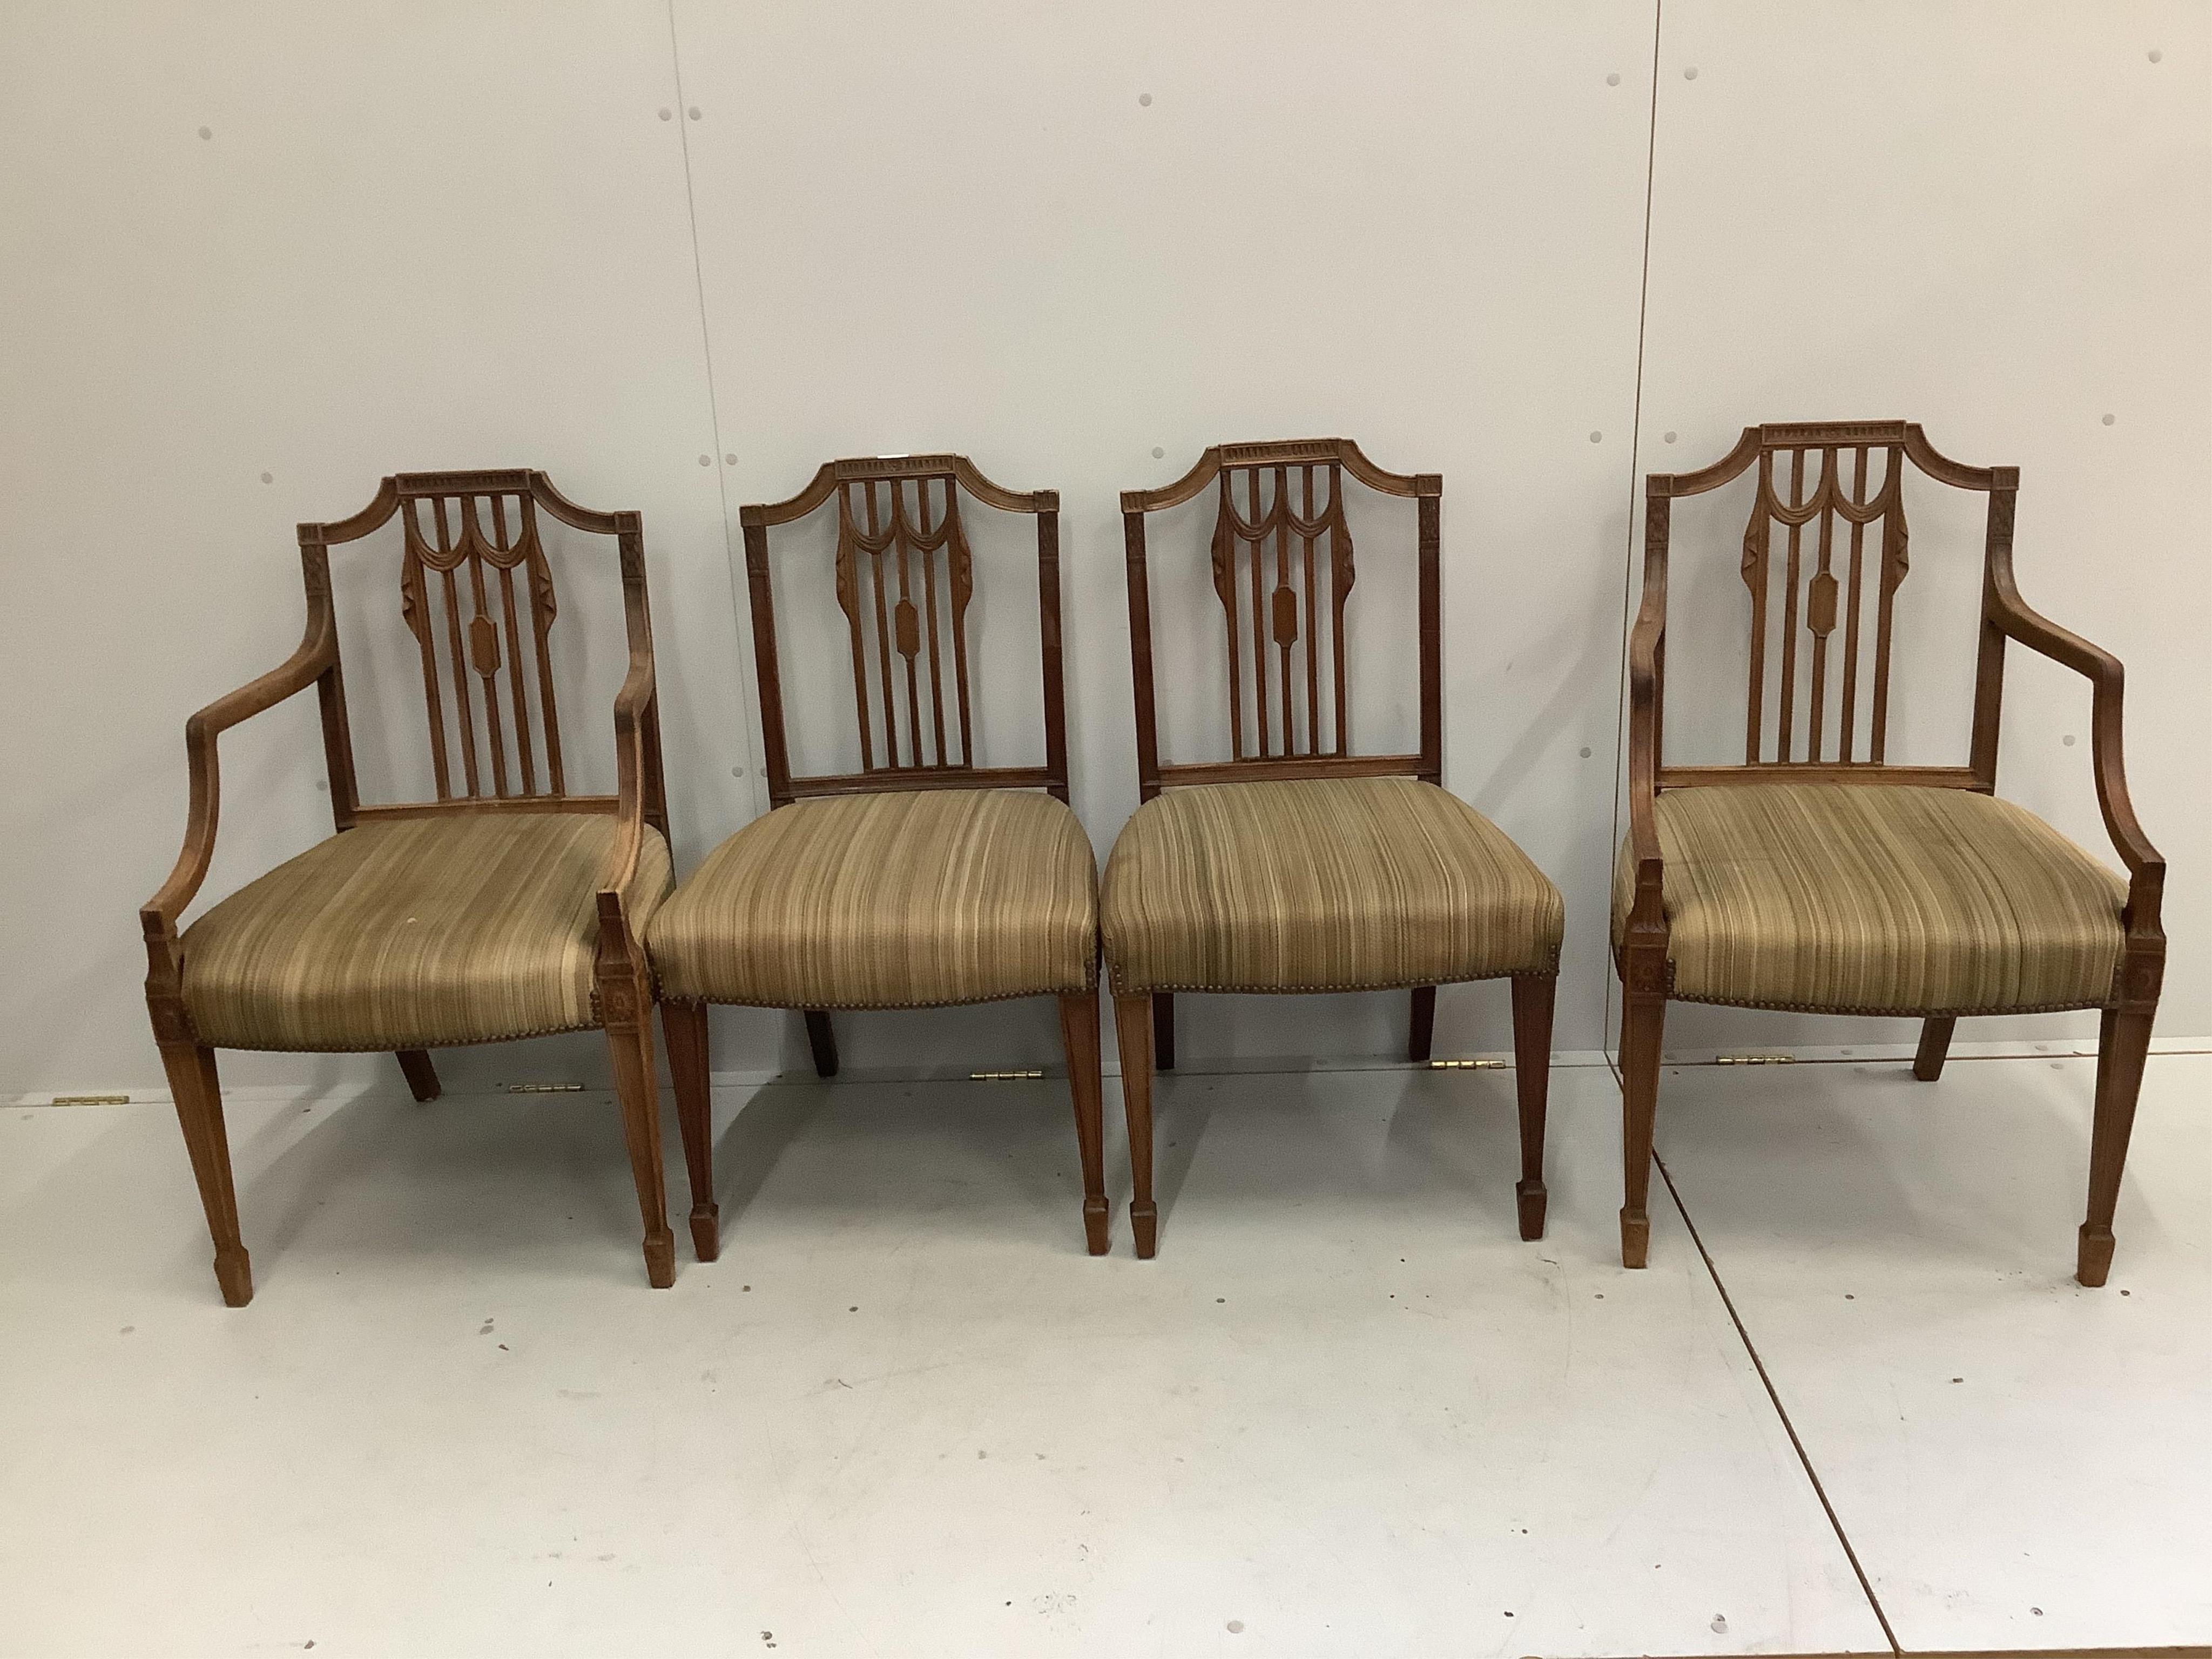 A set of seven Sheraton style mahogany dining chairs, two with arms, width 56cm, depth 50cm, height 91cm. Condition - fair